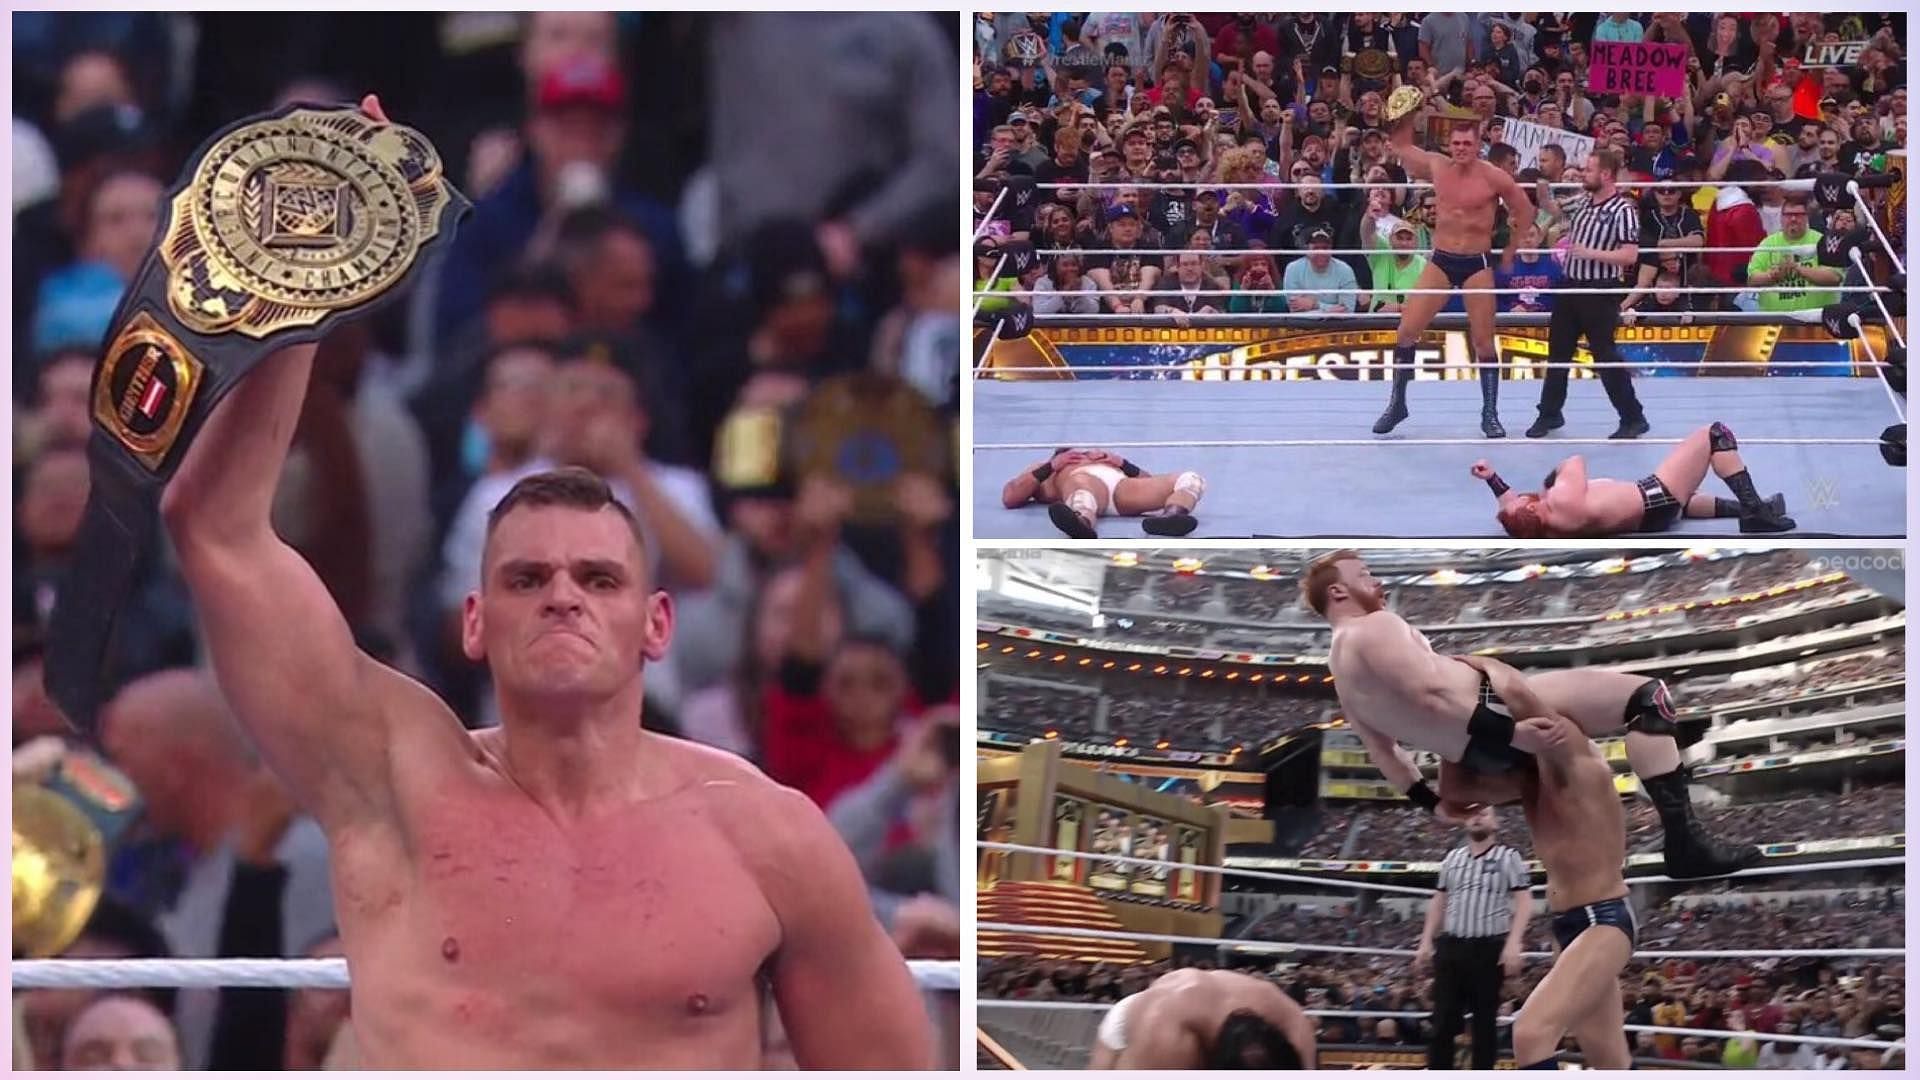 Gunther retained the Intercontinental Championship at WrestleMania 39